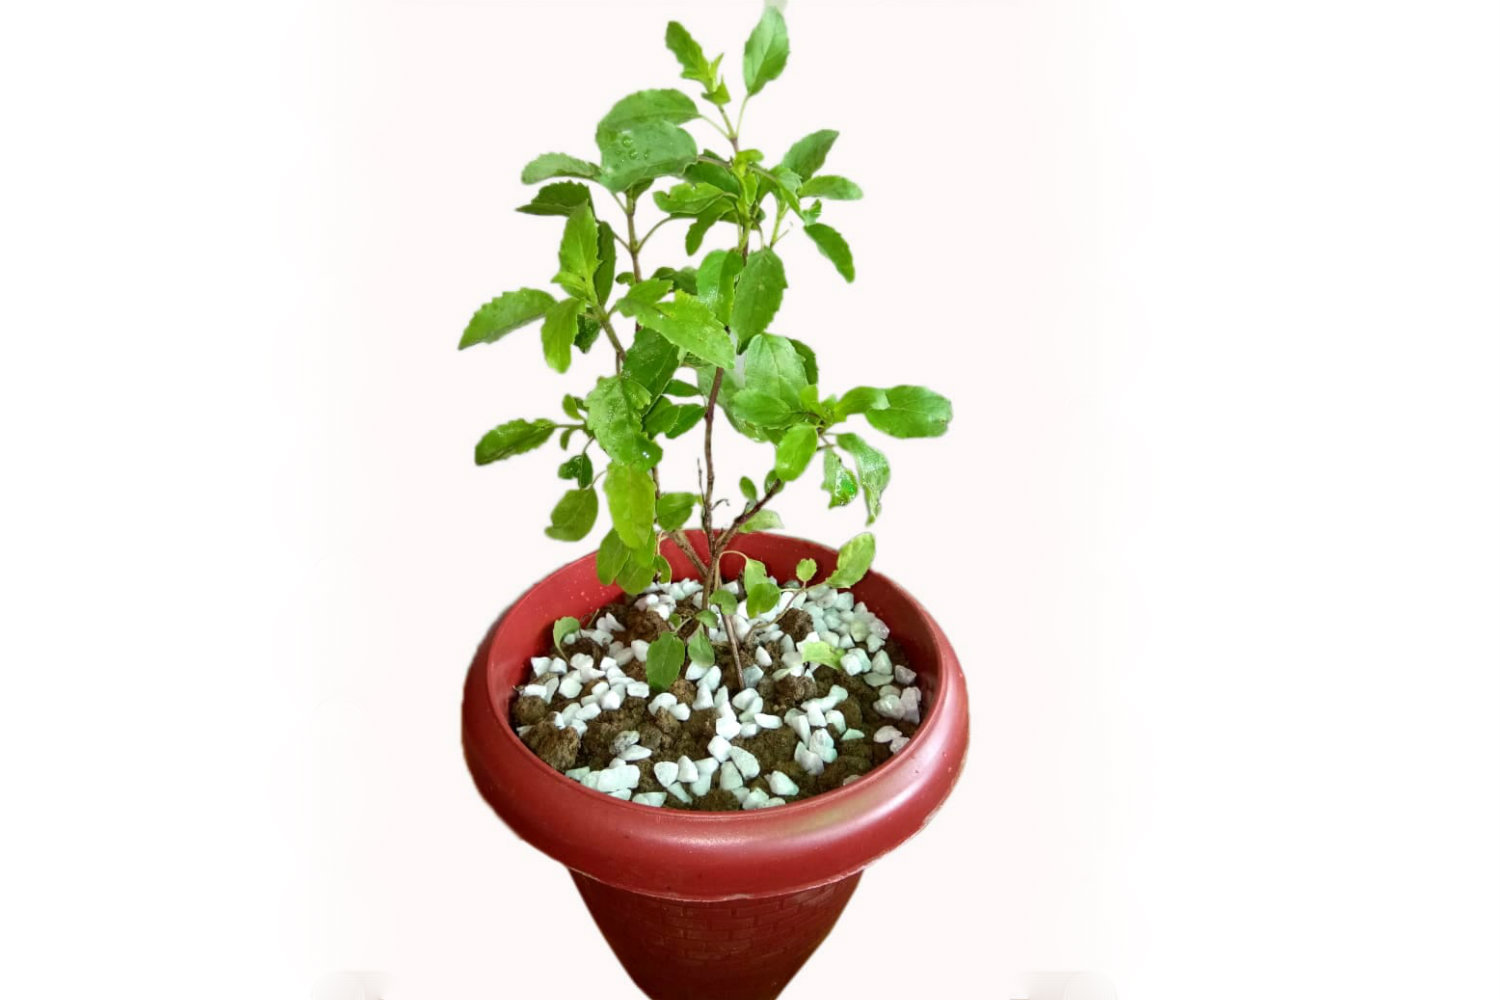 Side view of high quality Tulsi plant from Green Decor